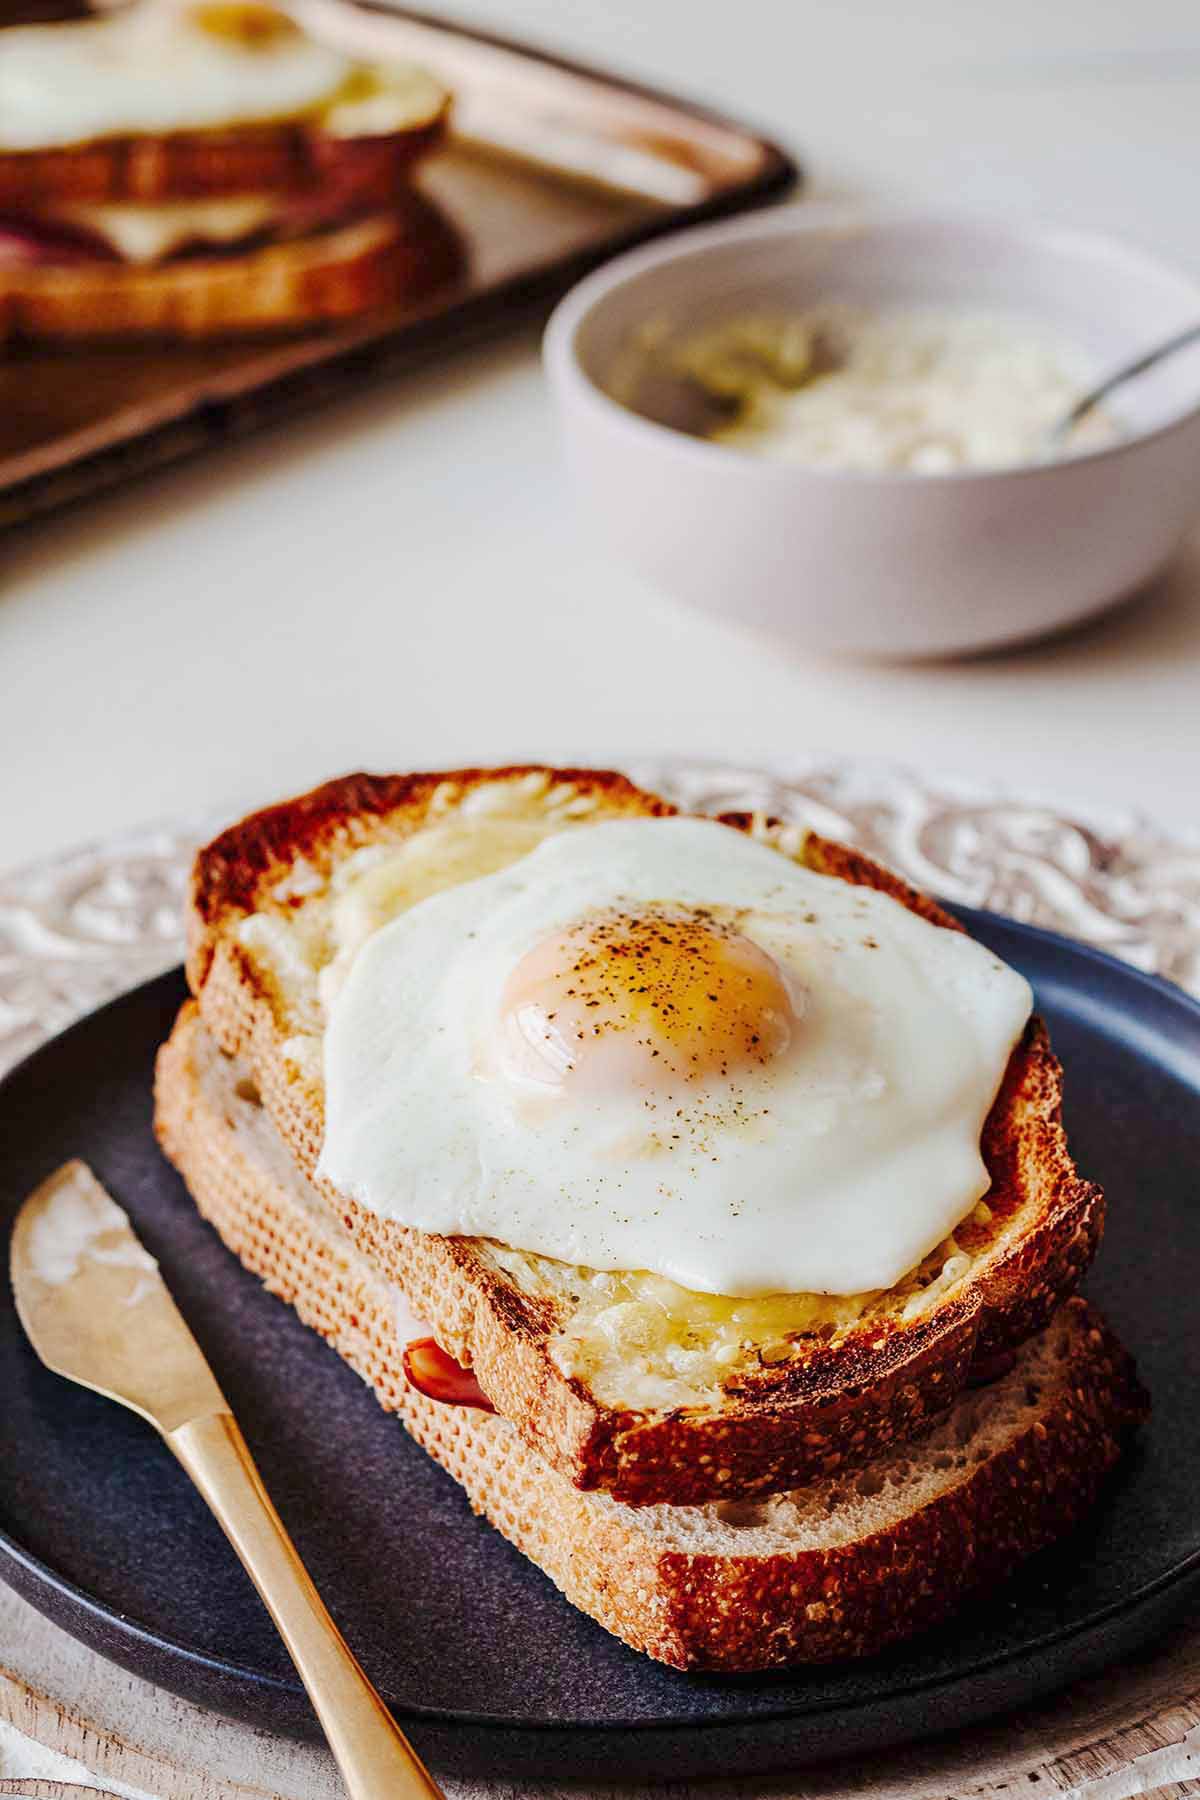 Croque madame on a grey plate with a gold knife.